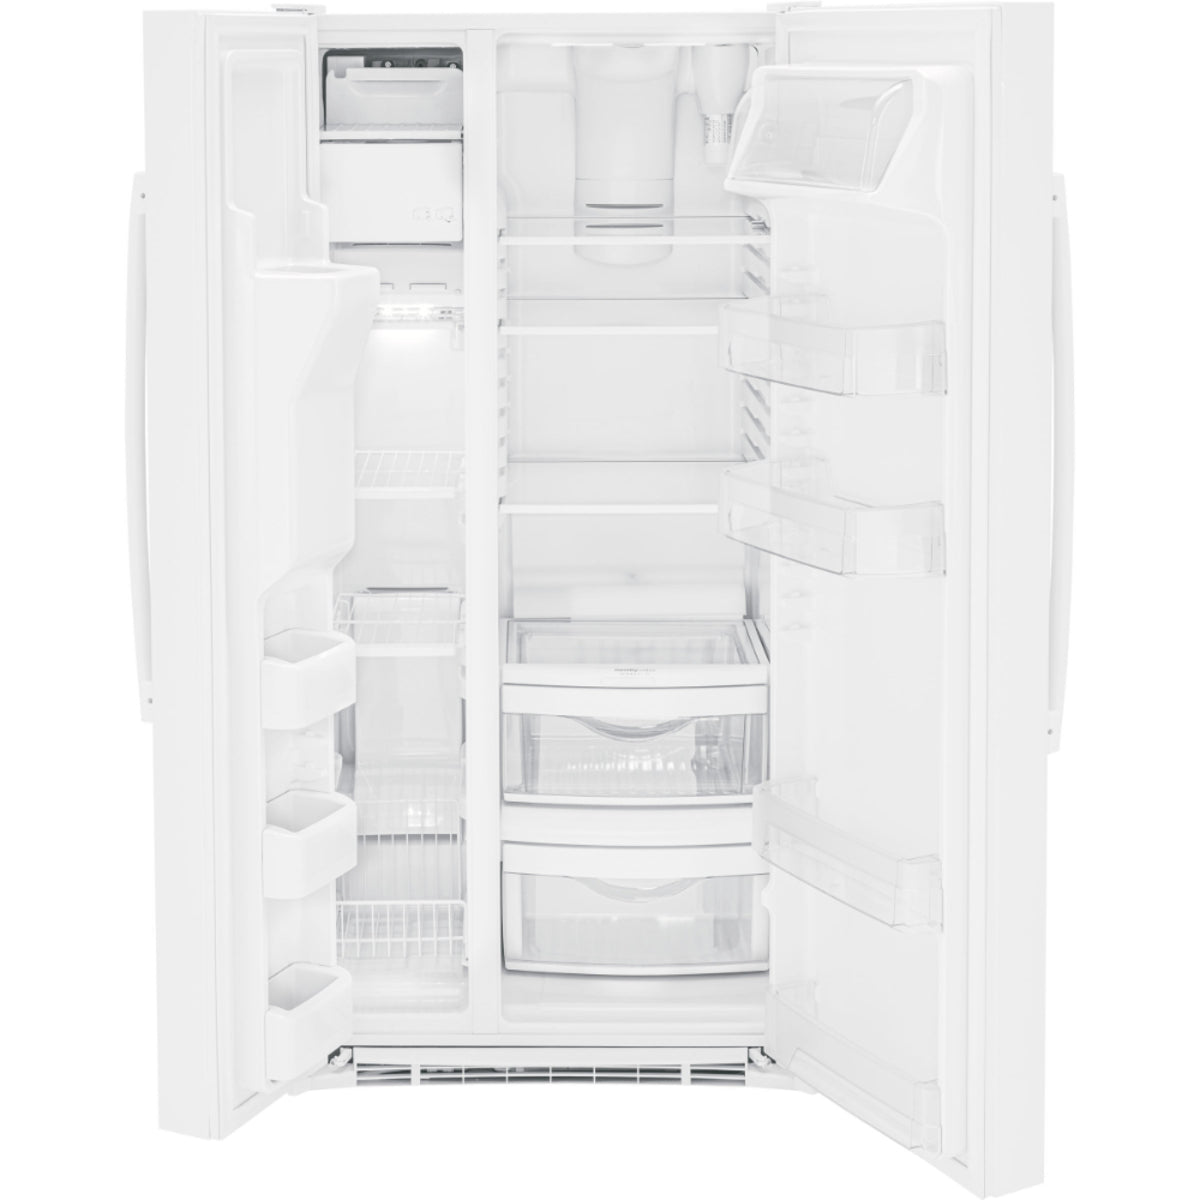 GE - 32.68 Inch 23.2 cu. ft Side by Side Refrigerator in White - GSS23GGPWW